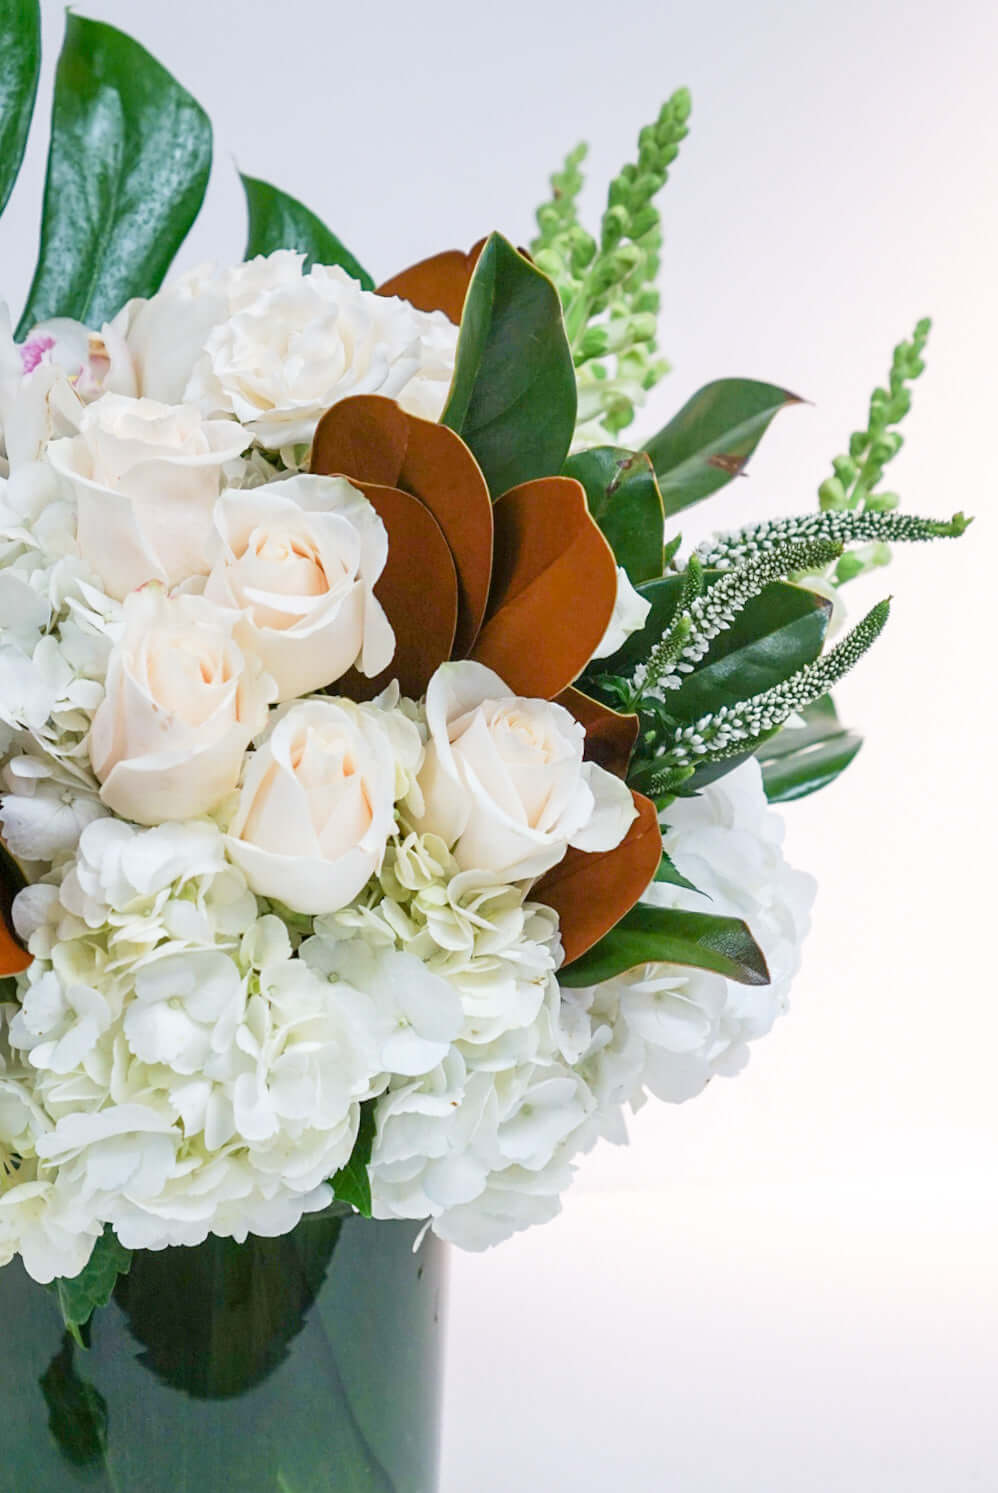 The Flower Nook a Toronto Florist using premium flowers that are professionally arranged, hand-delivered throughout Toronto and GTA